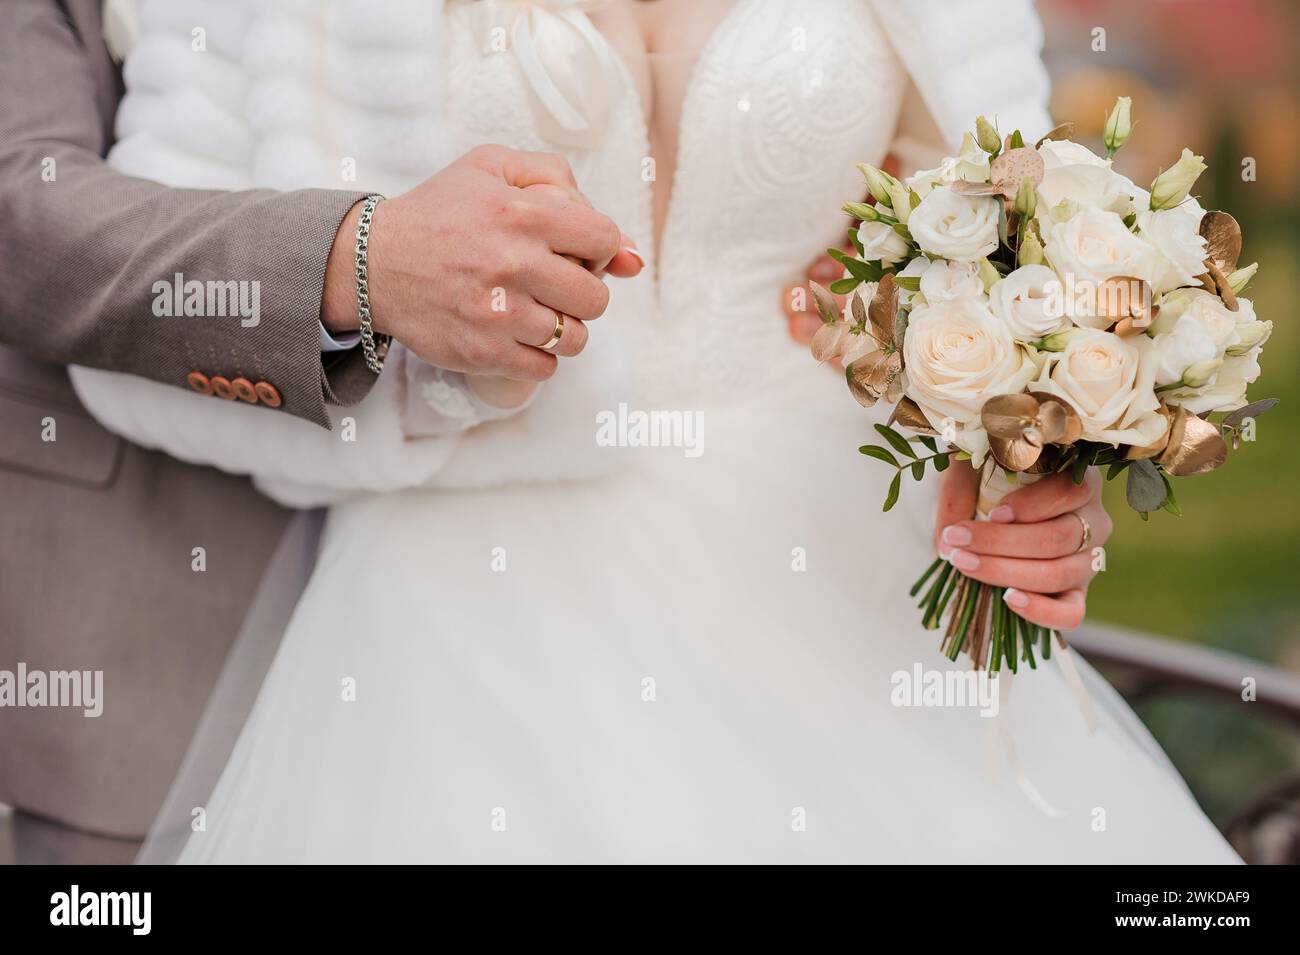 A beautiful wedding bouquet in the hands of the bride. A bouquet with white roses in the hands of the bride Stock Photo